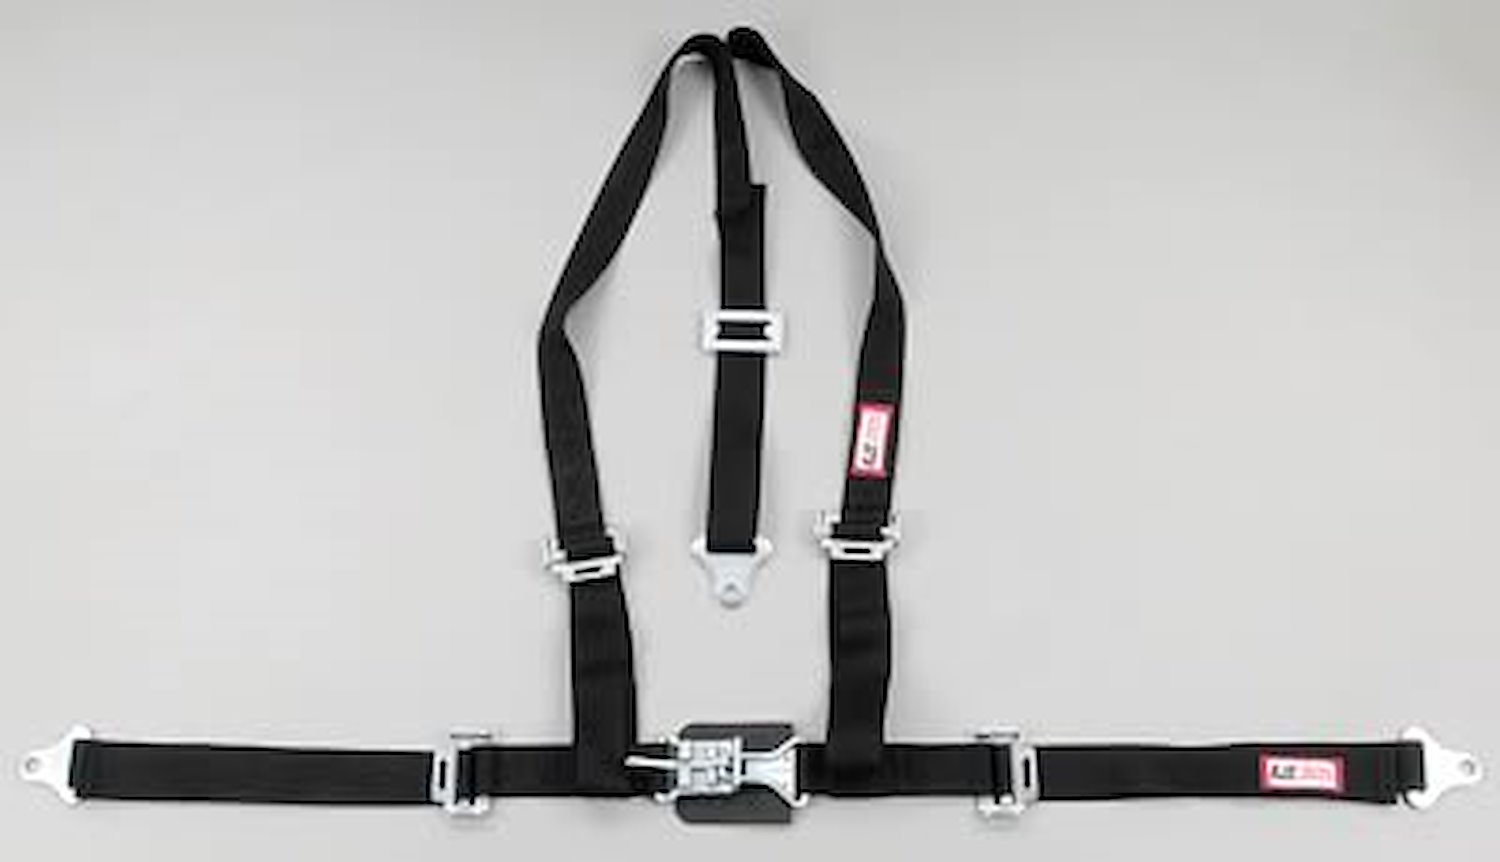 NON-SFI L&L HARNESS 3 PULL DOWN Lap Belt w/adjuster 2 S.H. Individual FLOOR Mount ALL WRAP ENDS BLUE